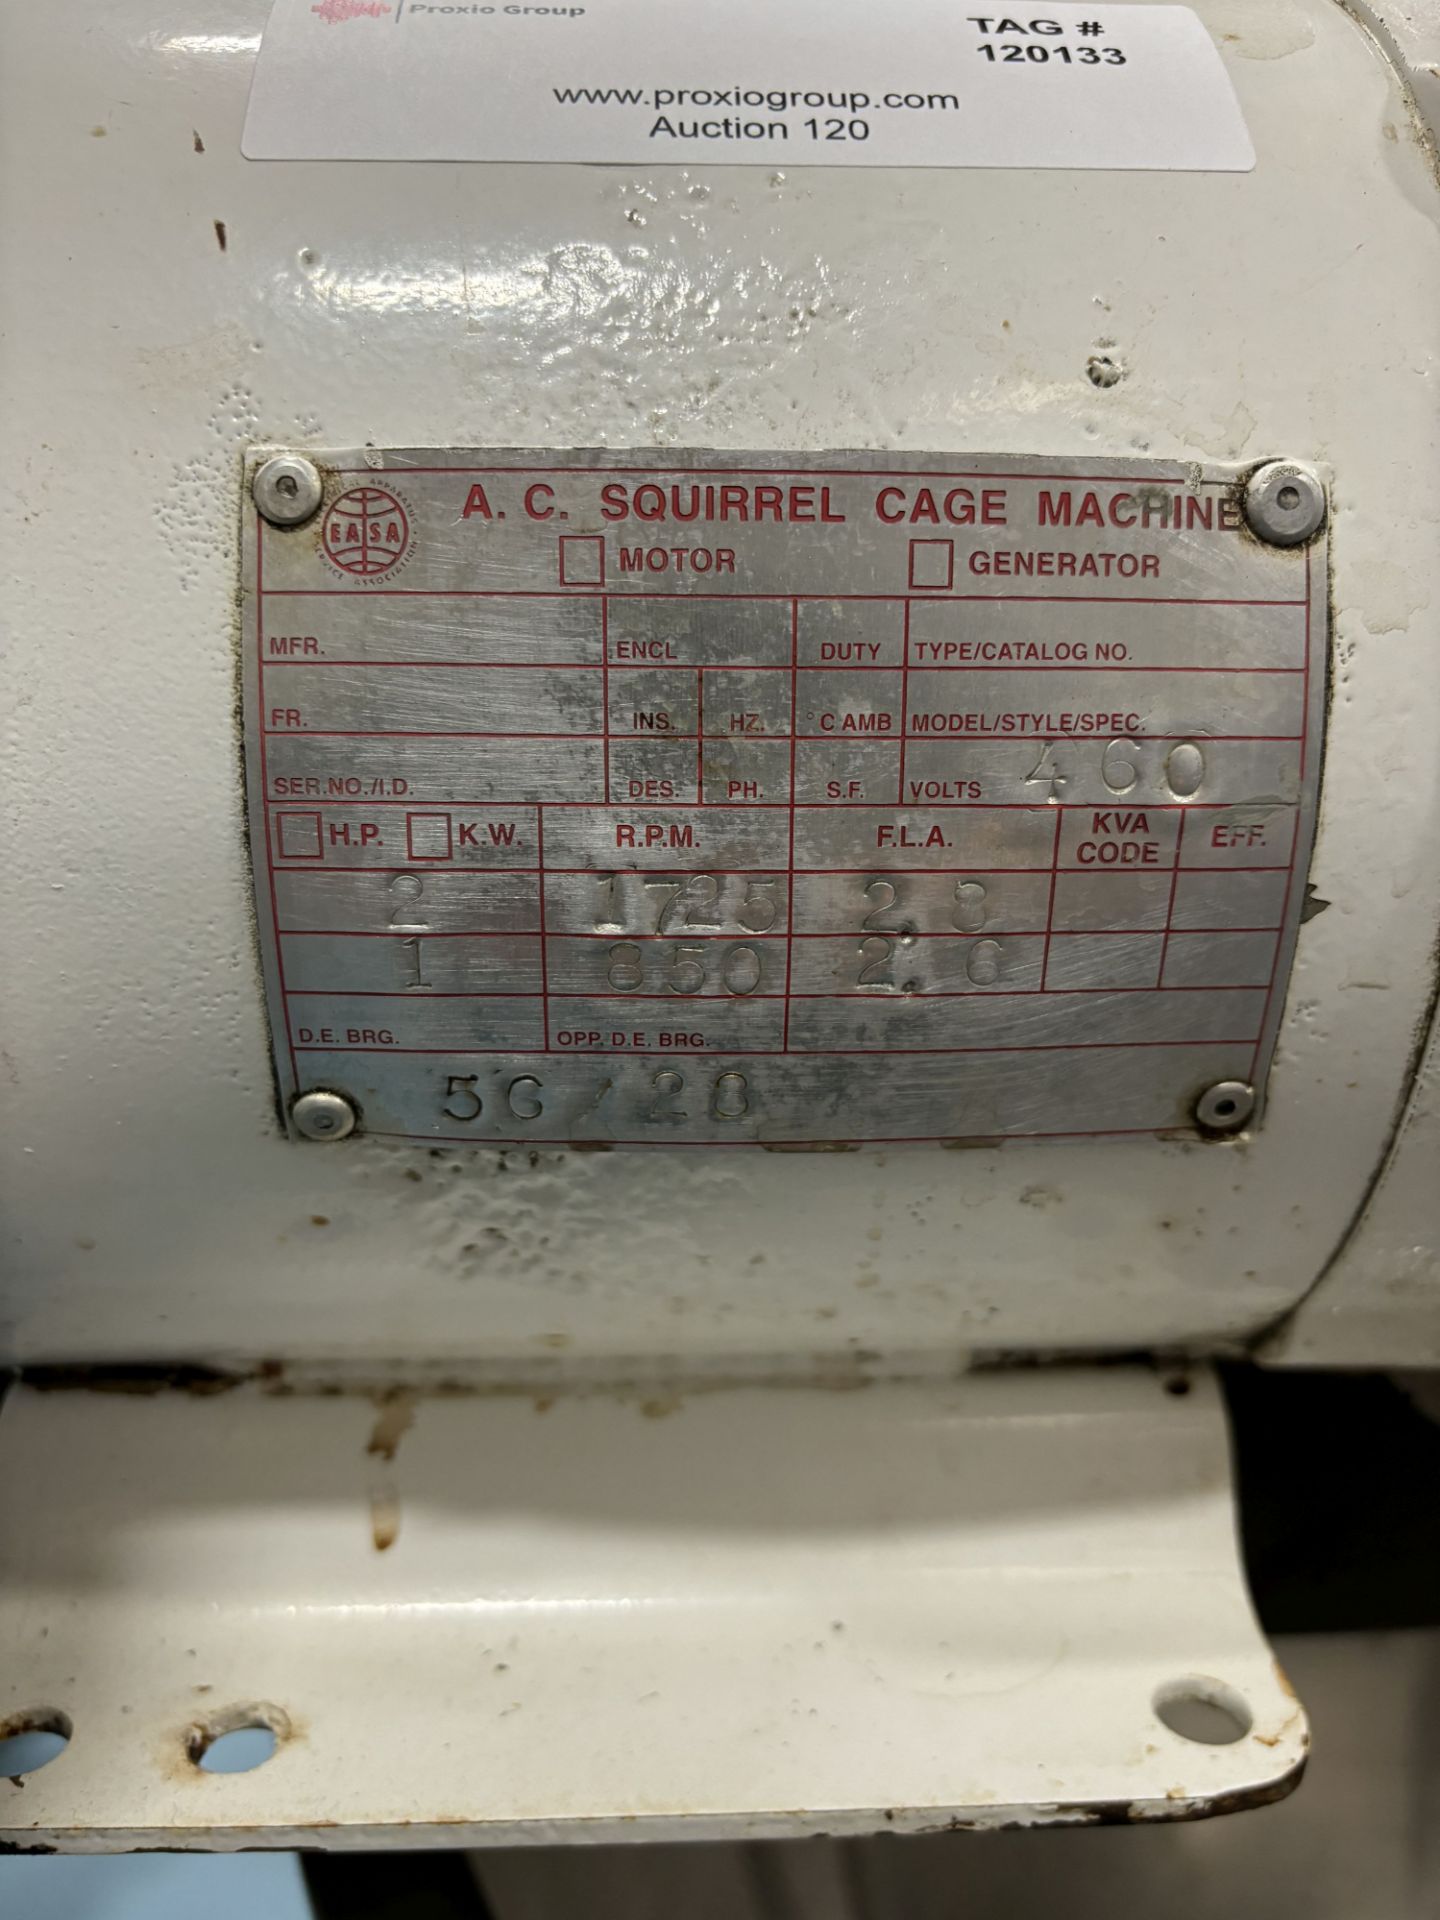 45 Gallon Jacketed Kettle with Sweep Agitation and gear reducer - Image 4 of 8